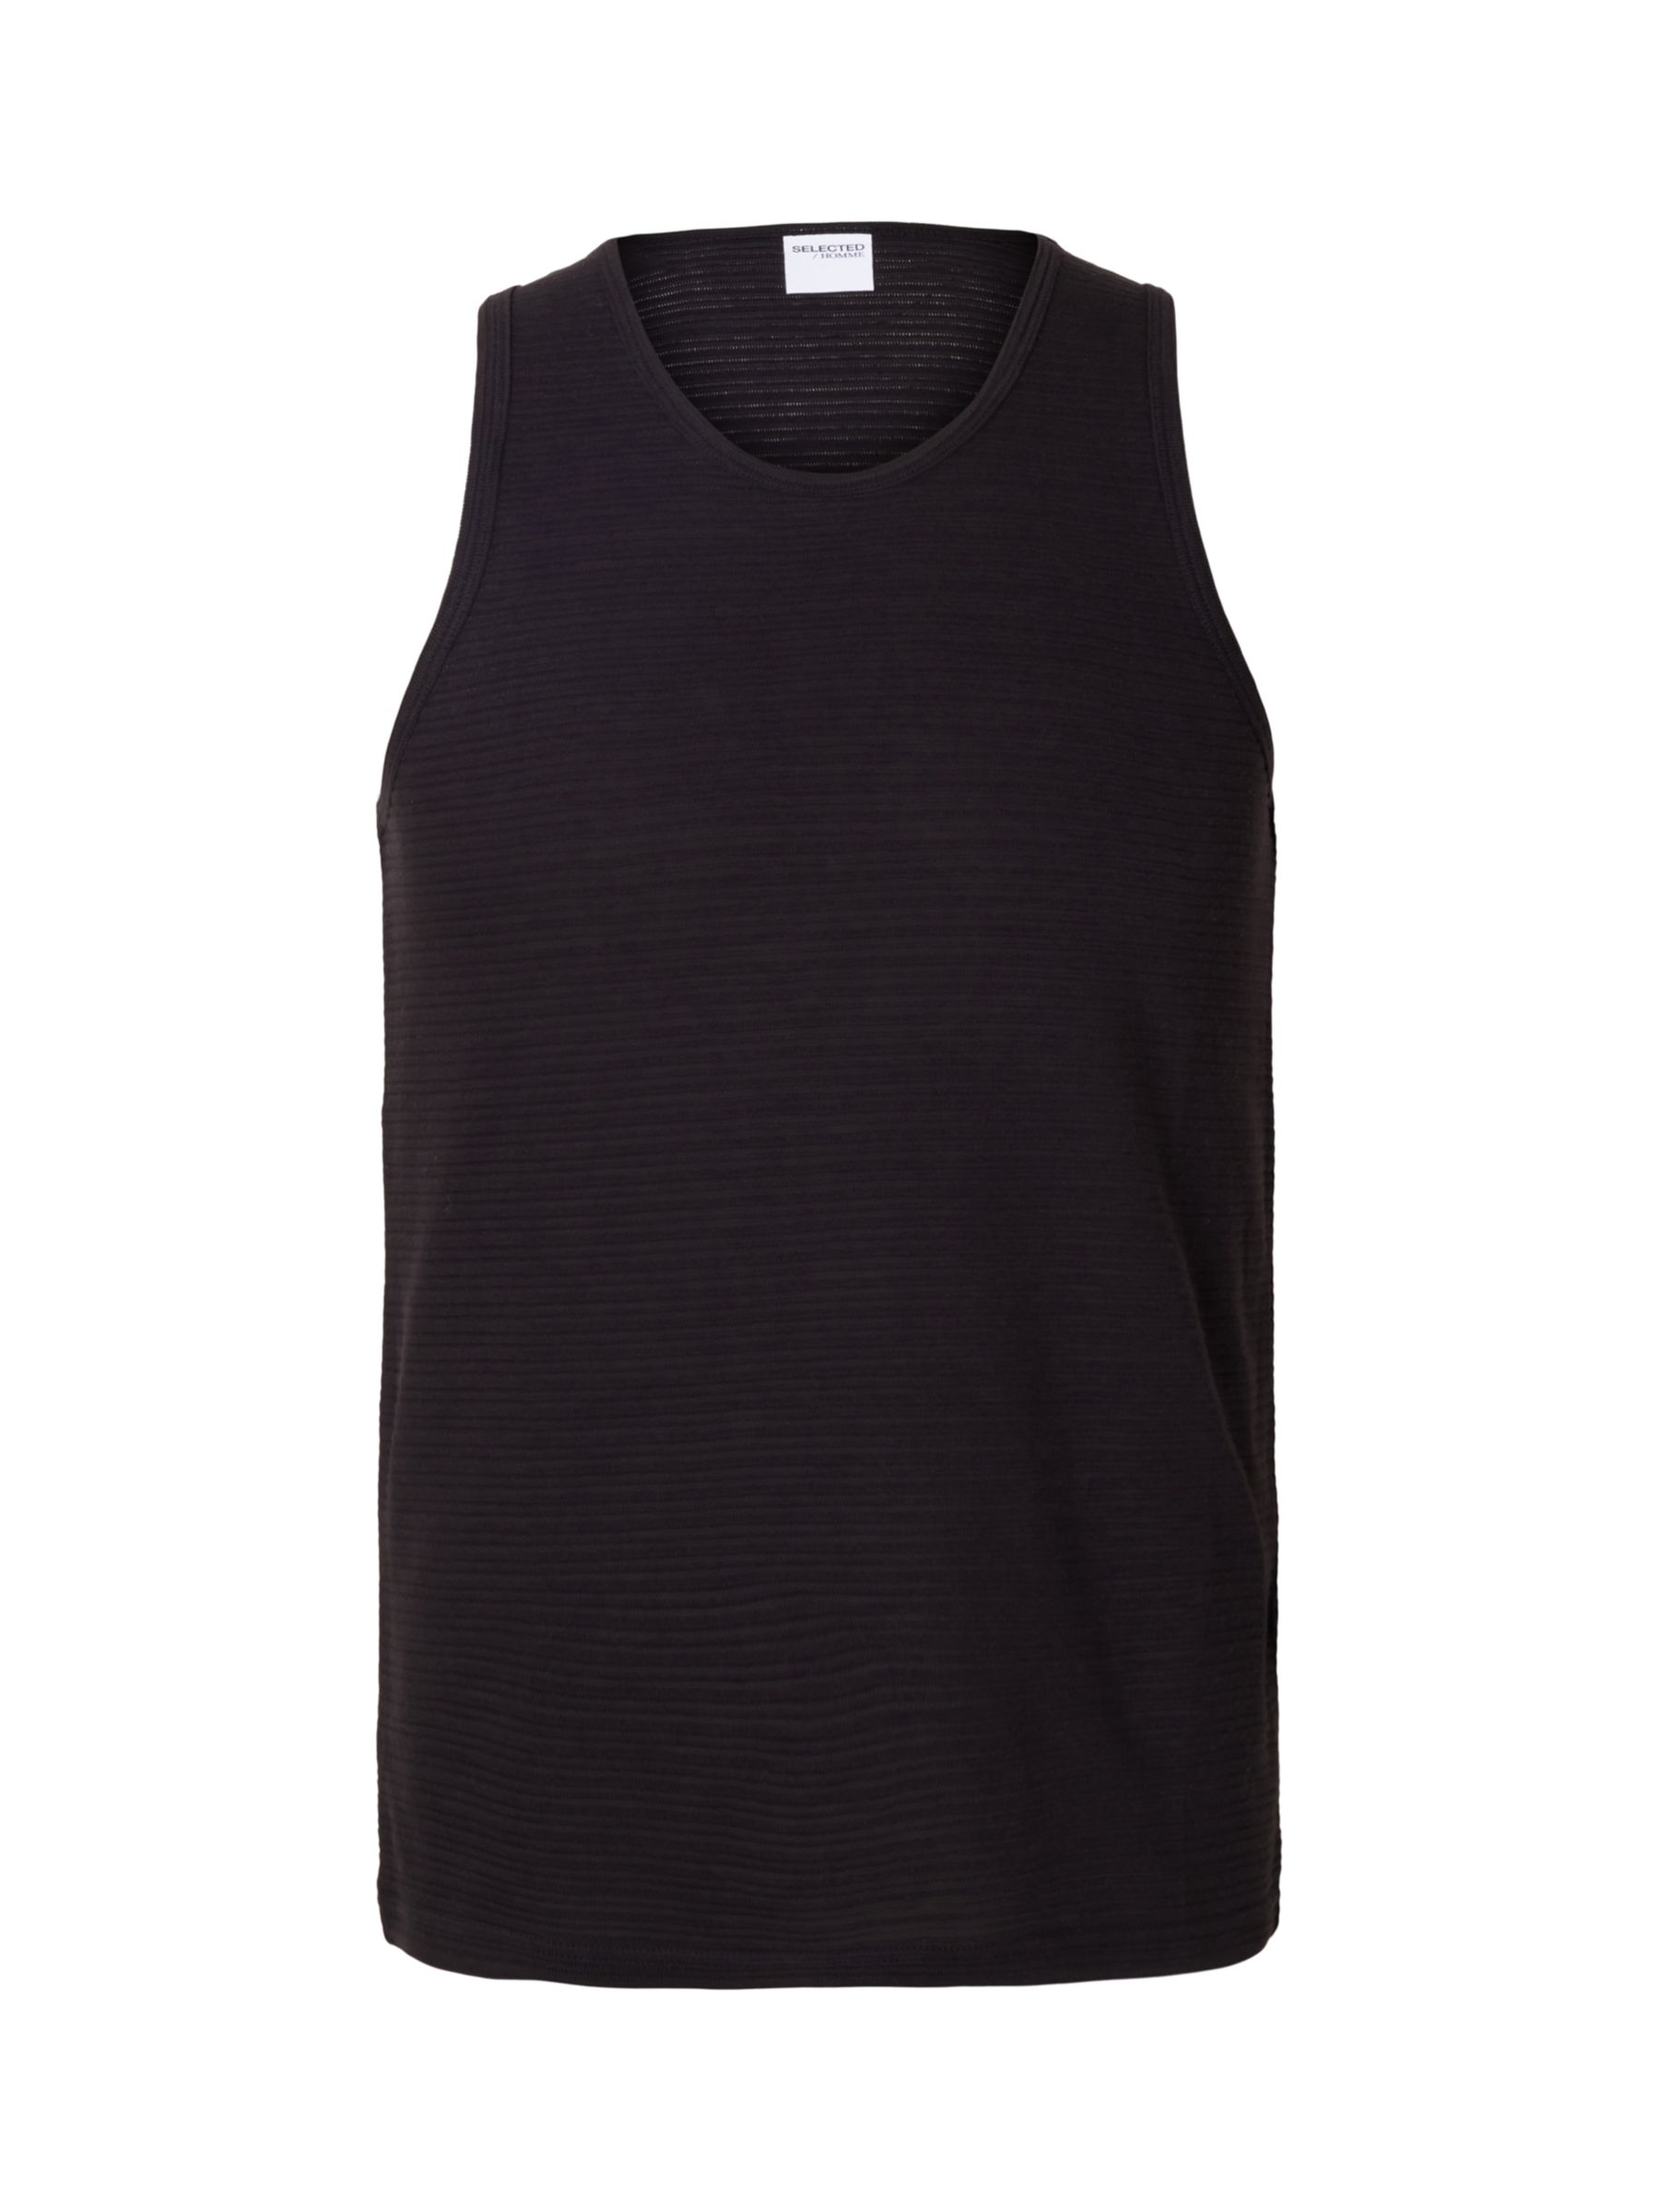 SELECTED HOMME Organic Cotton Tank Top, Black, S